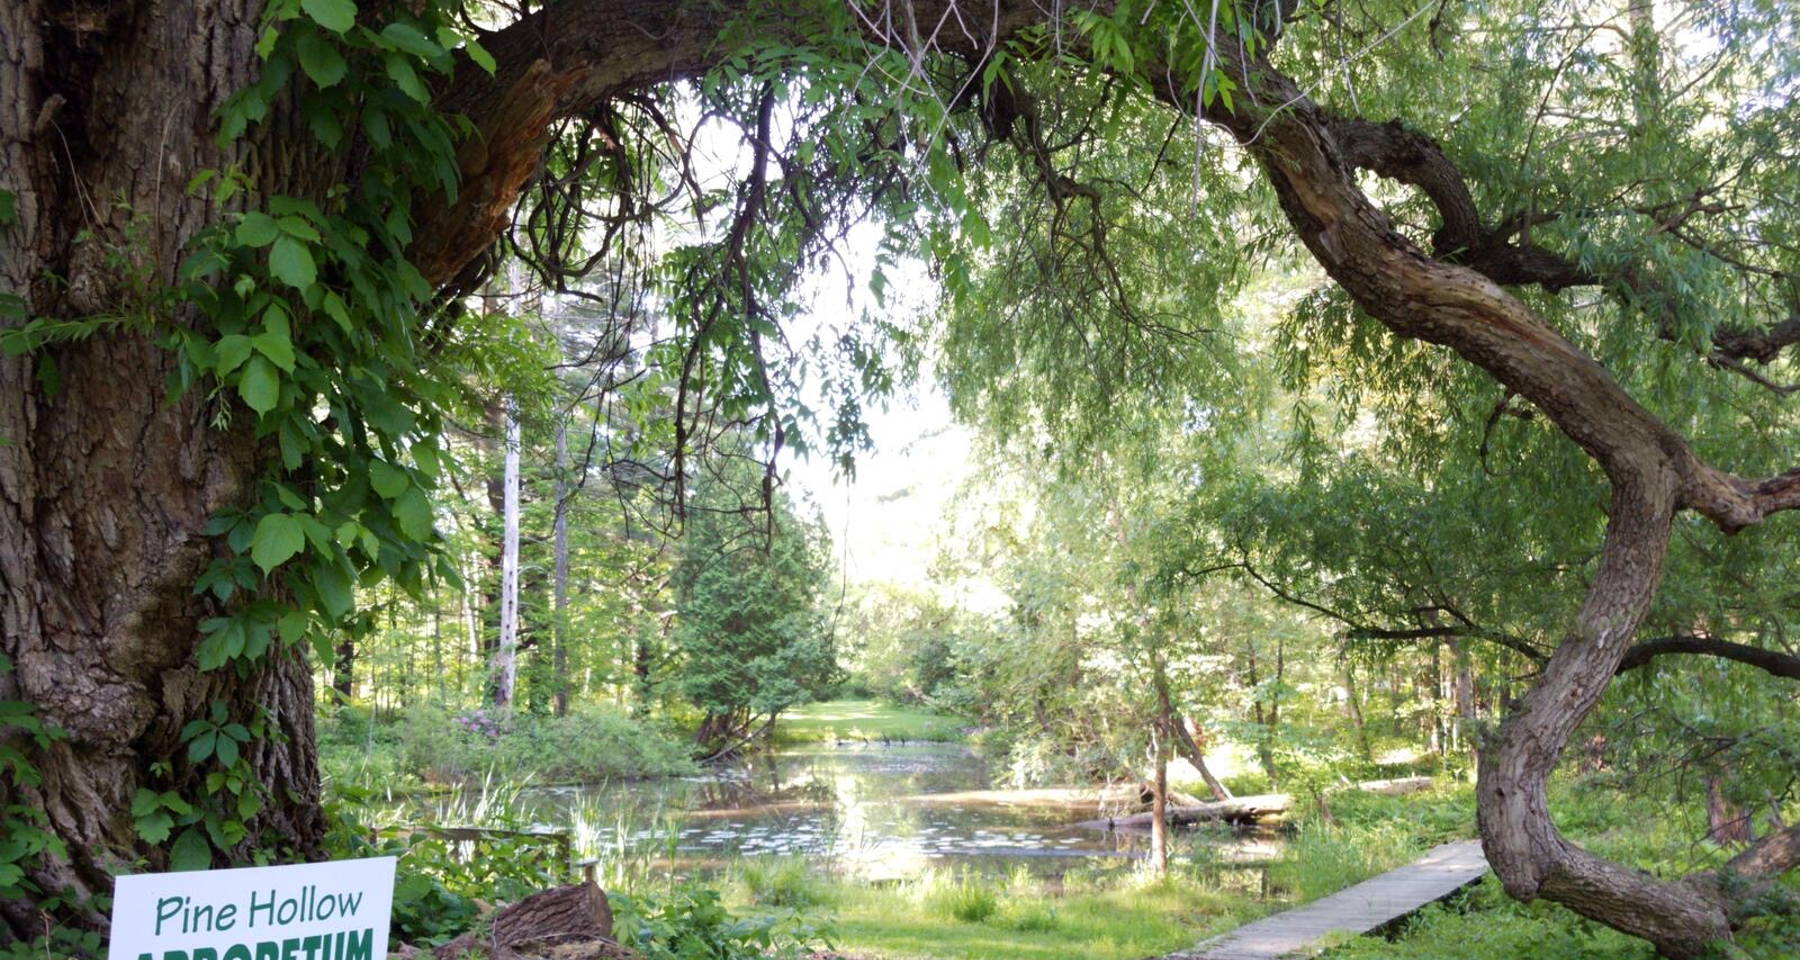 Music in the Trees: Classical Flute, Cello, and Piano Trios at the Pine Hollow Arboretum